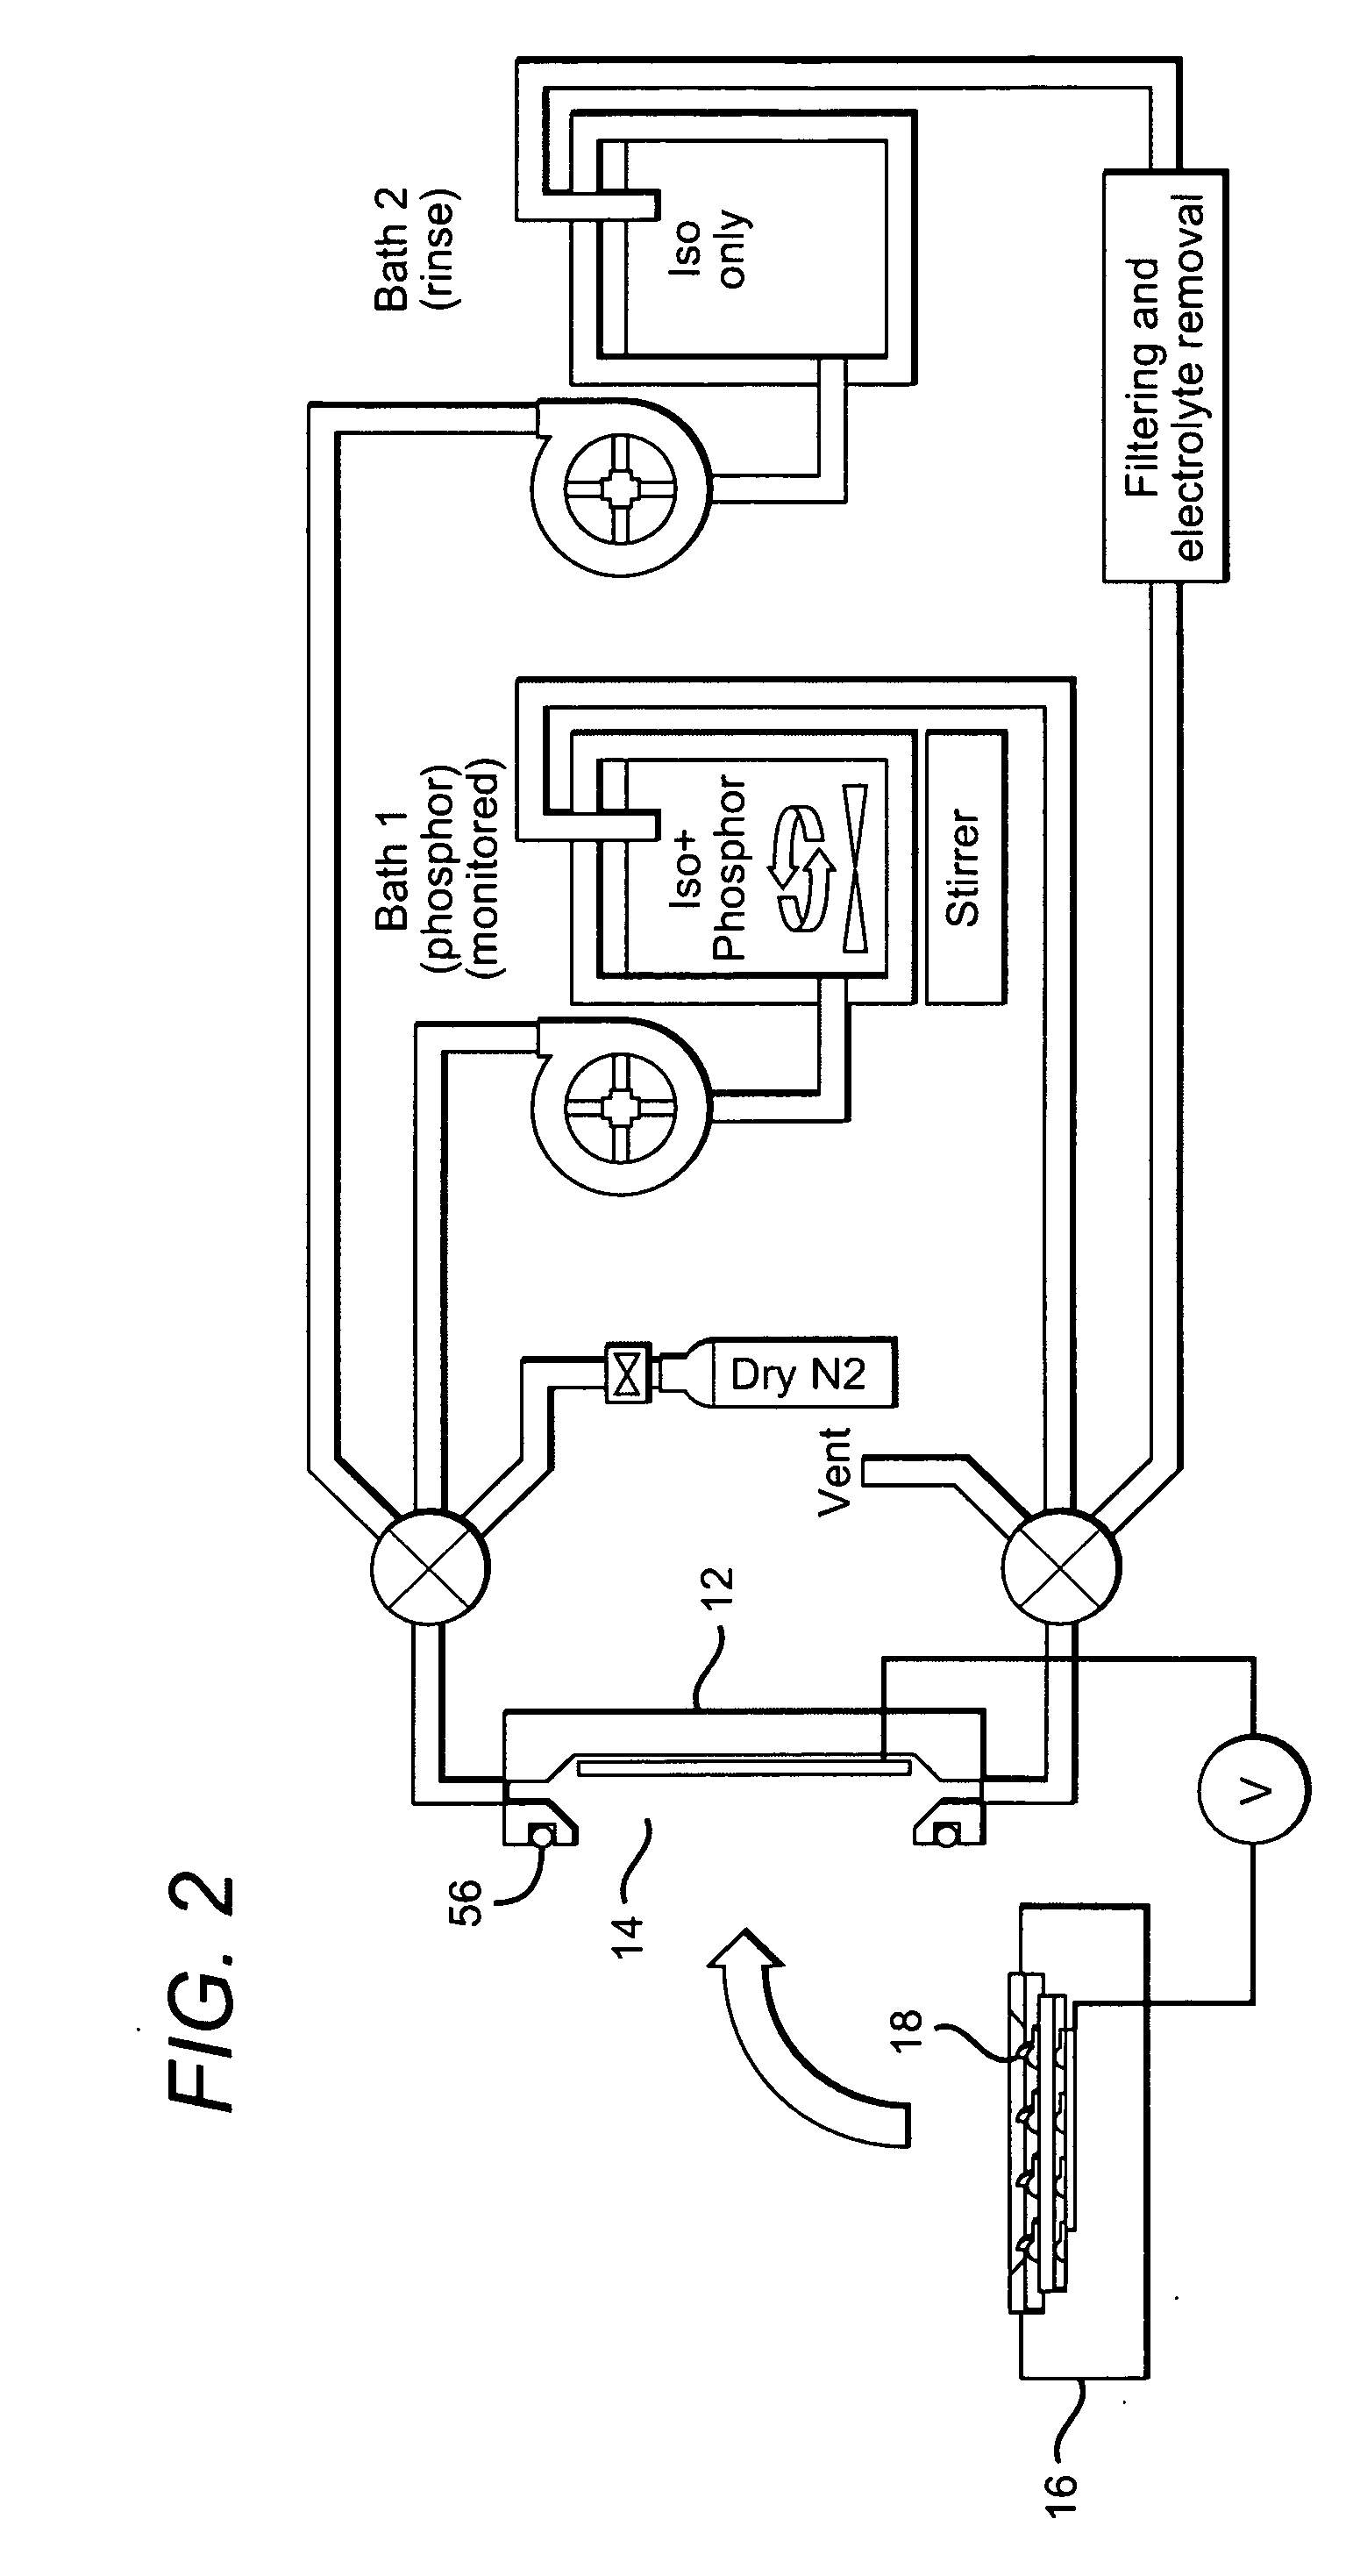 Close loop electrophoretic deposition of semiconductor devices